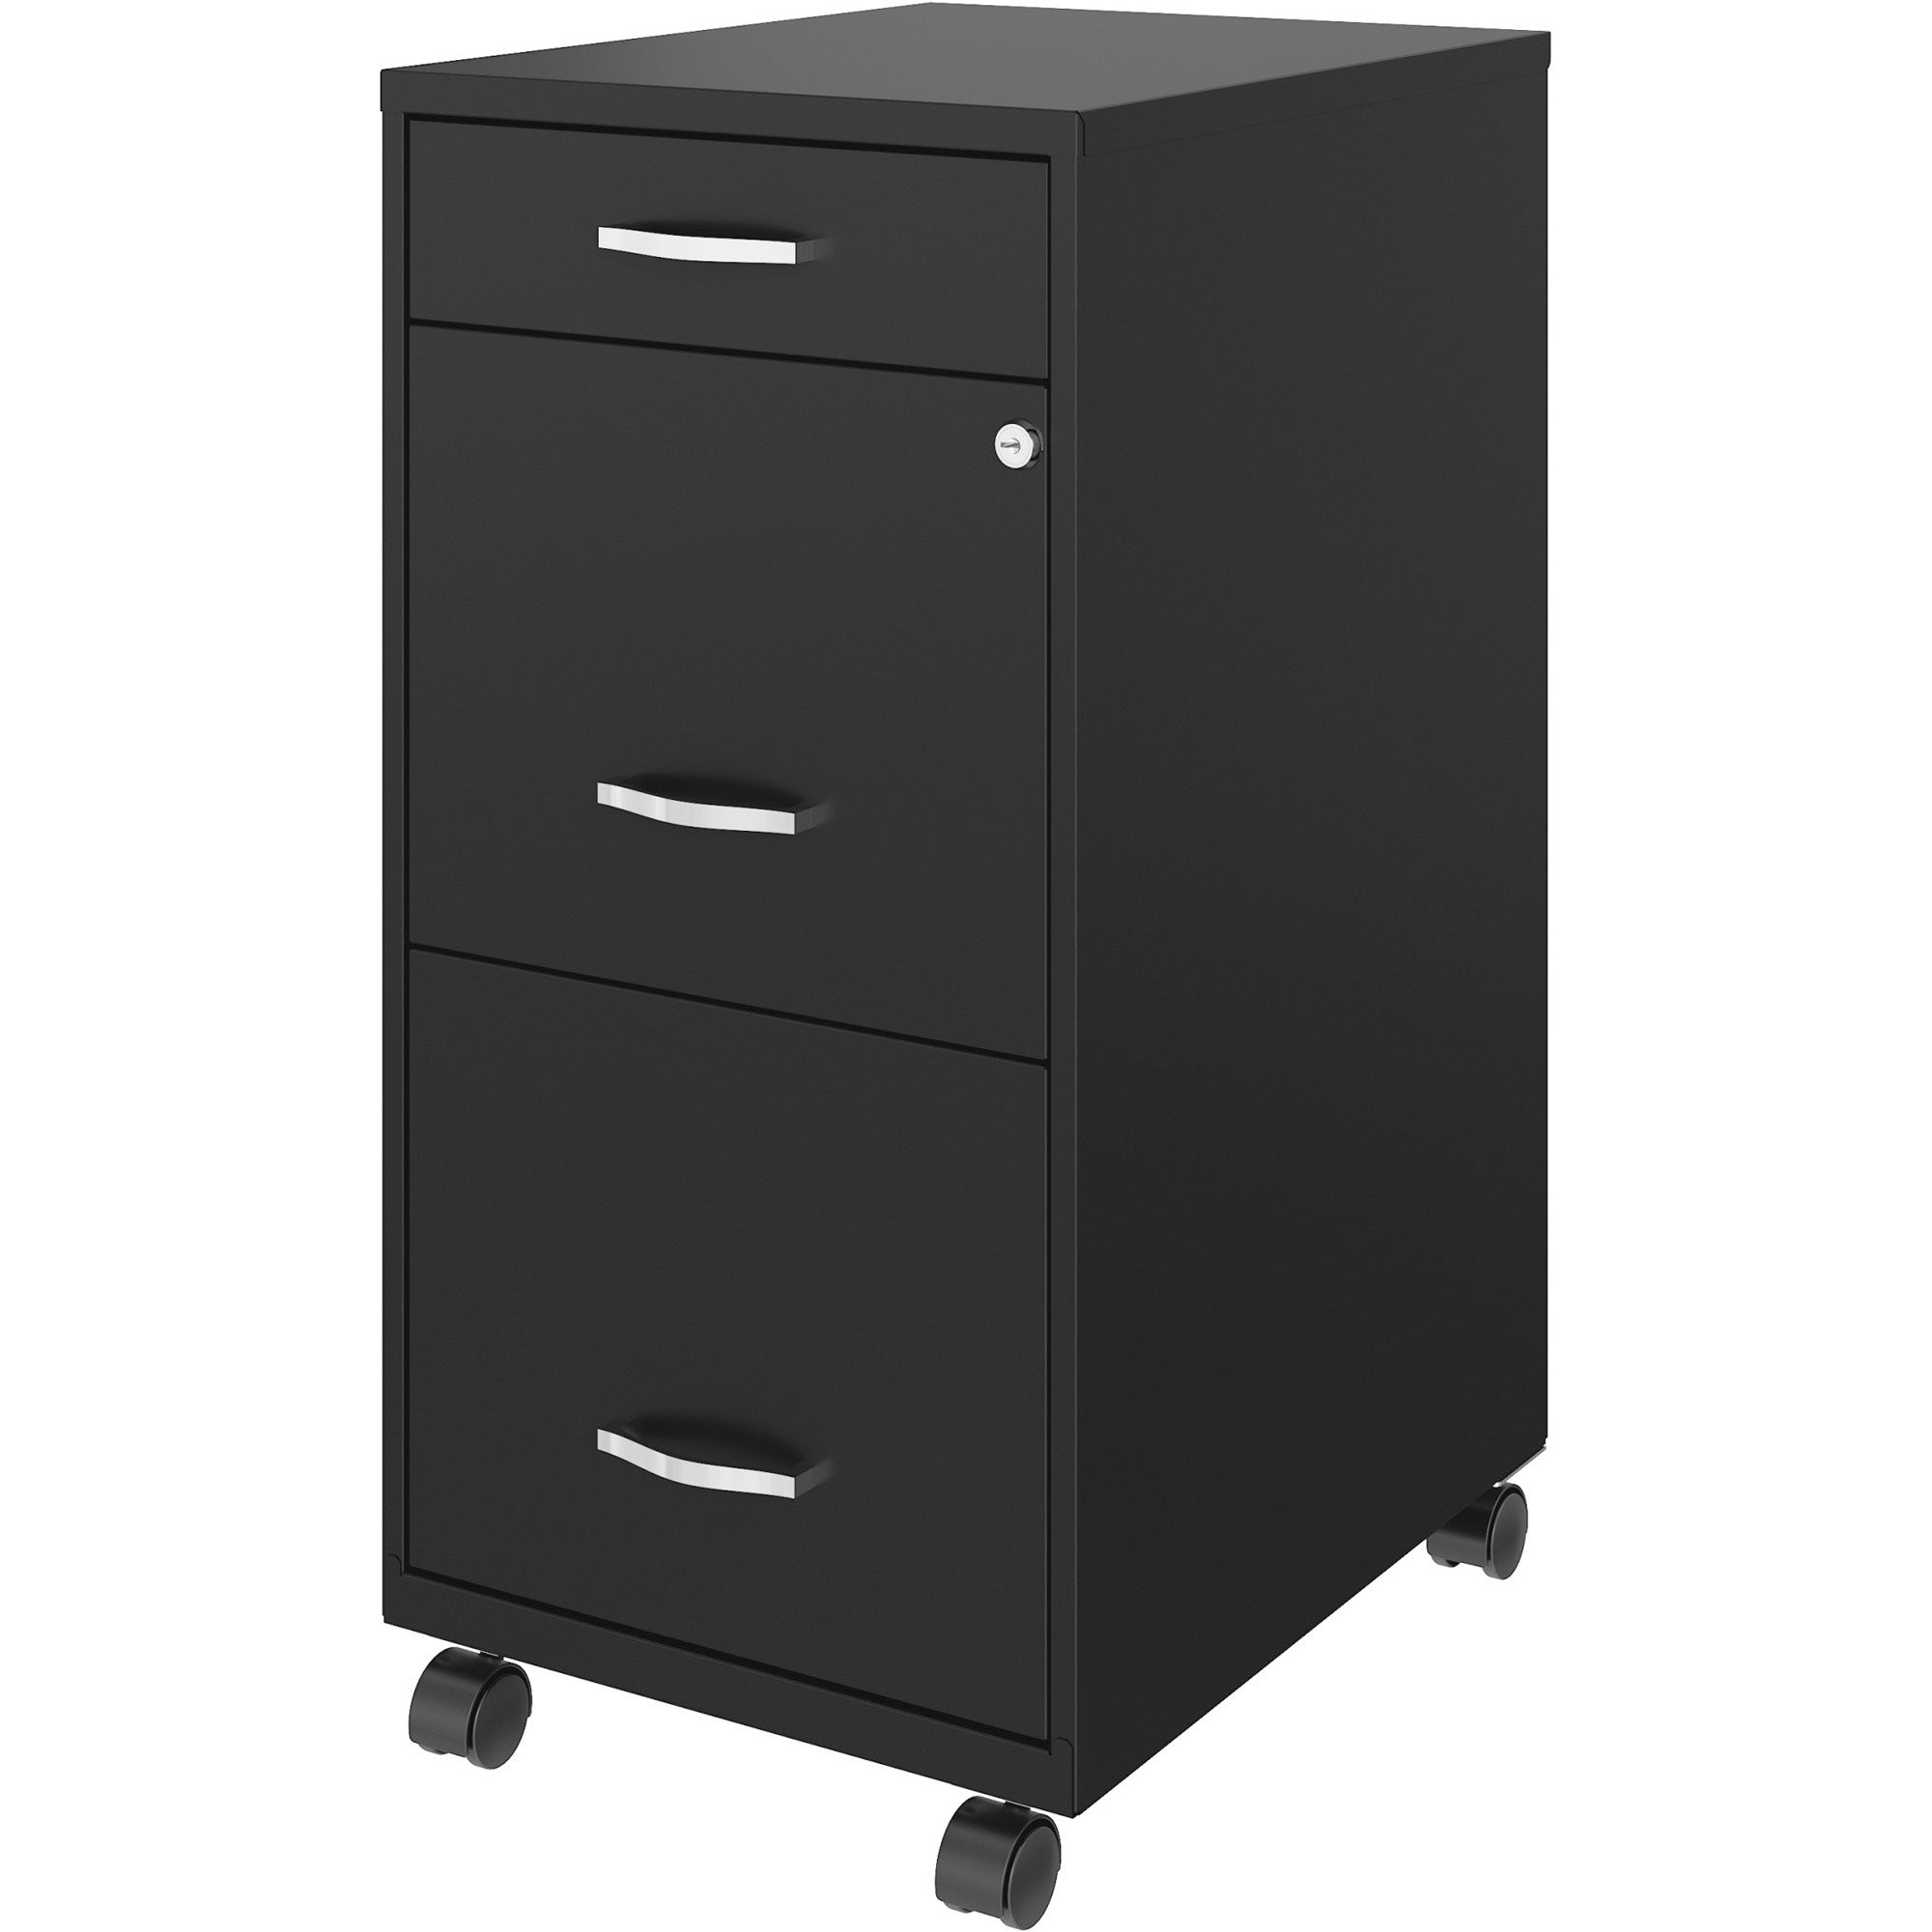 nusparc-mobile-file-cabinet-142-x-18-x-295-3-x-drawers-for-file-box-letter-mobility-locking-drawer-glide-suspension-3-4-drawer-extension-cam-lock-nonporous-surface-black-painted-steel-recycled_nprvf318bmbk - 3